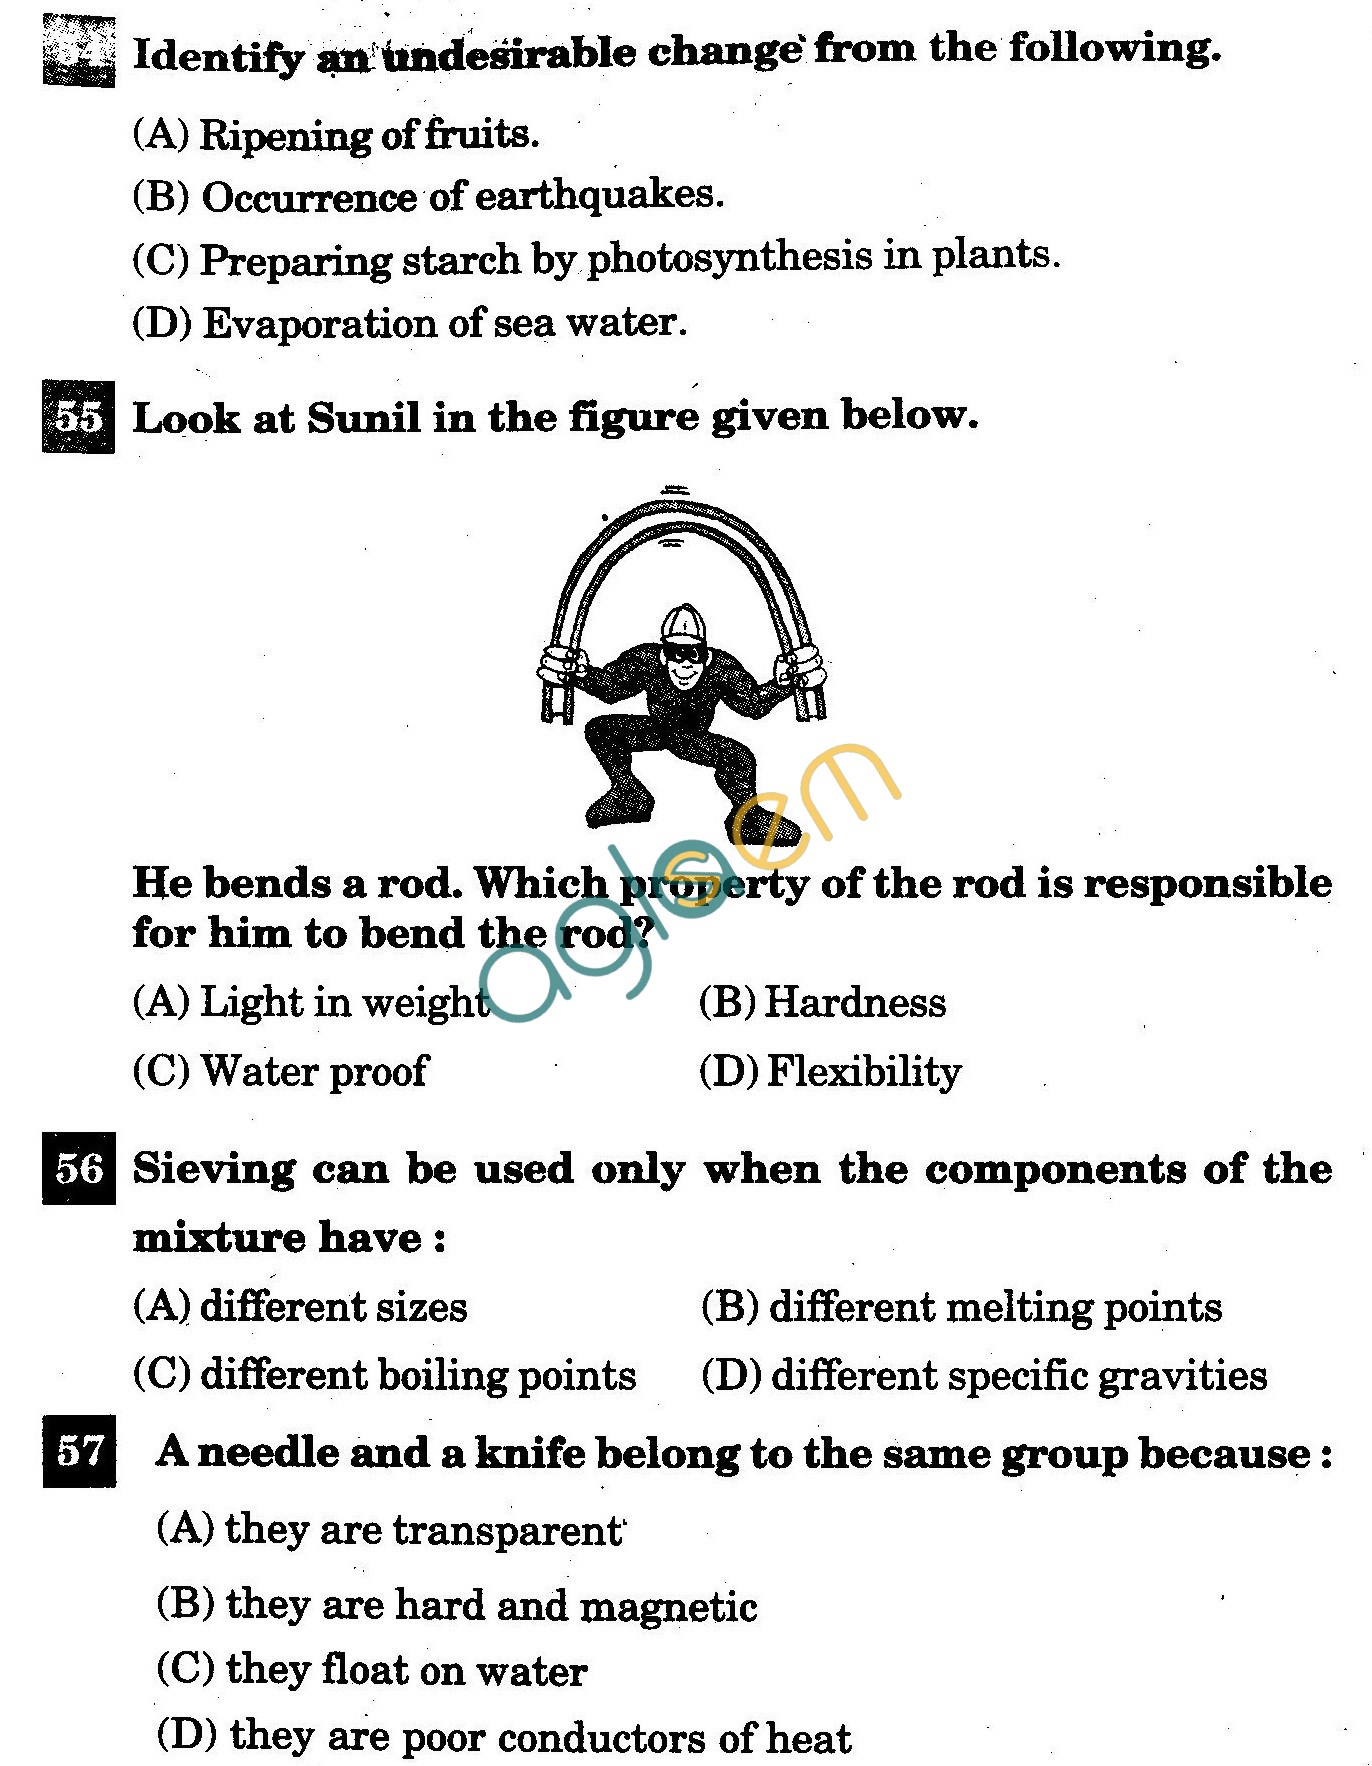 NSTSE 2011: Class VI Question Paper with Answers - Chemistry